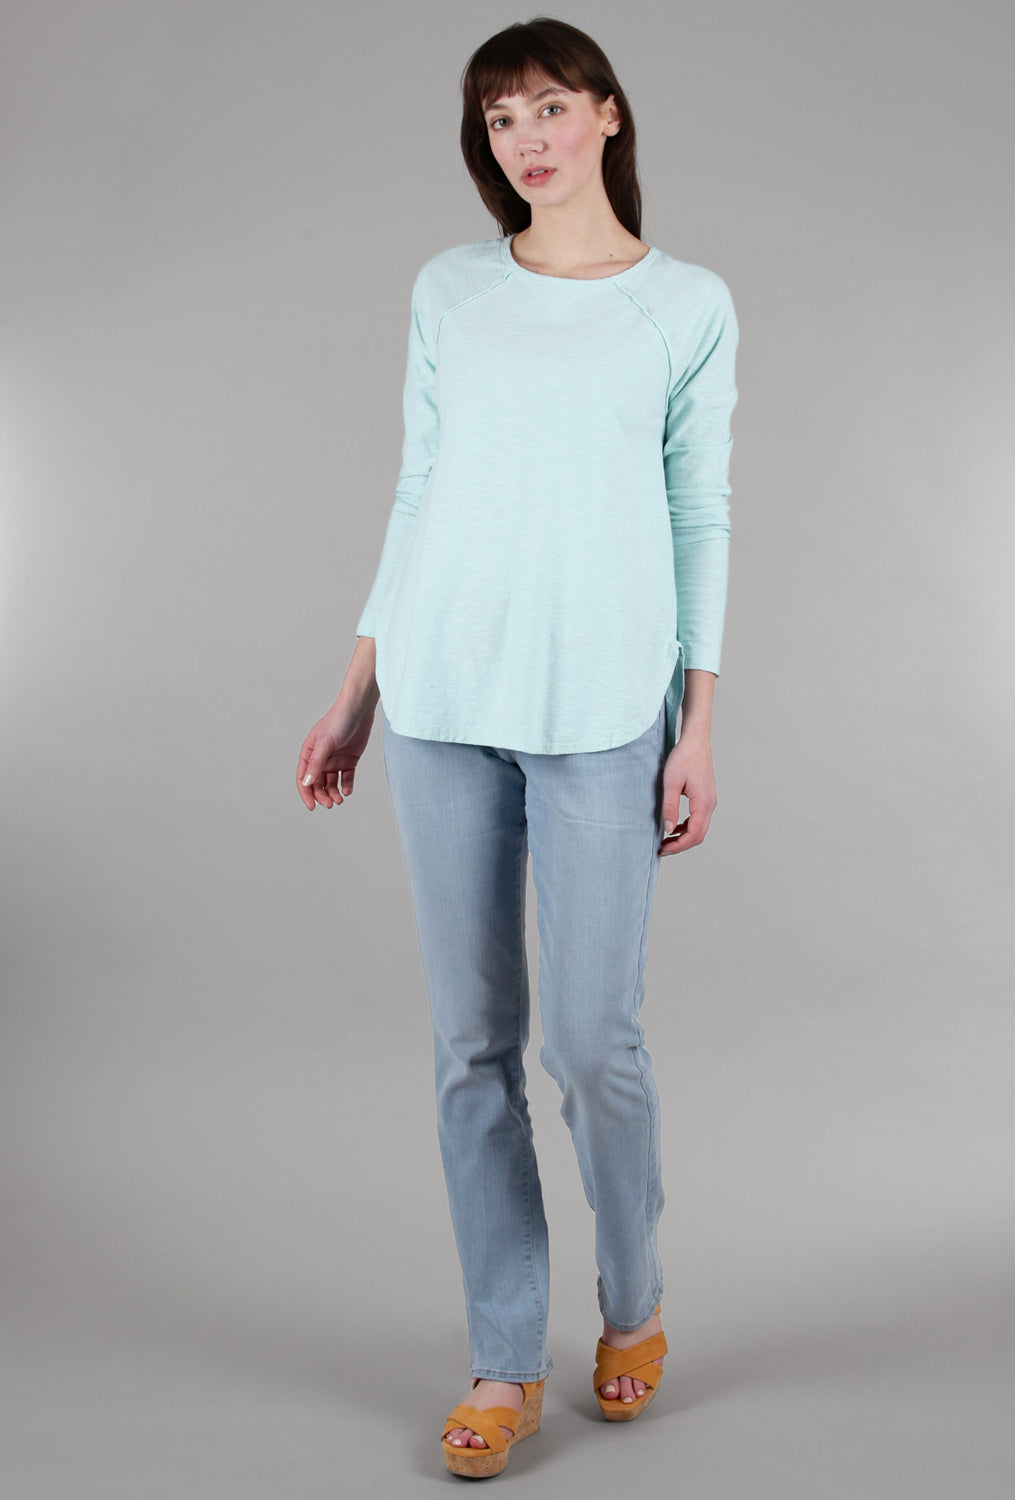 Cut Loose L/S Ruched Back Tee, Mente 